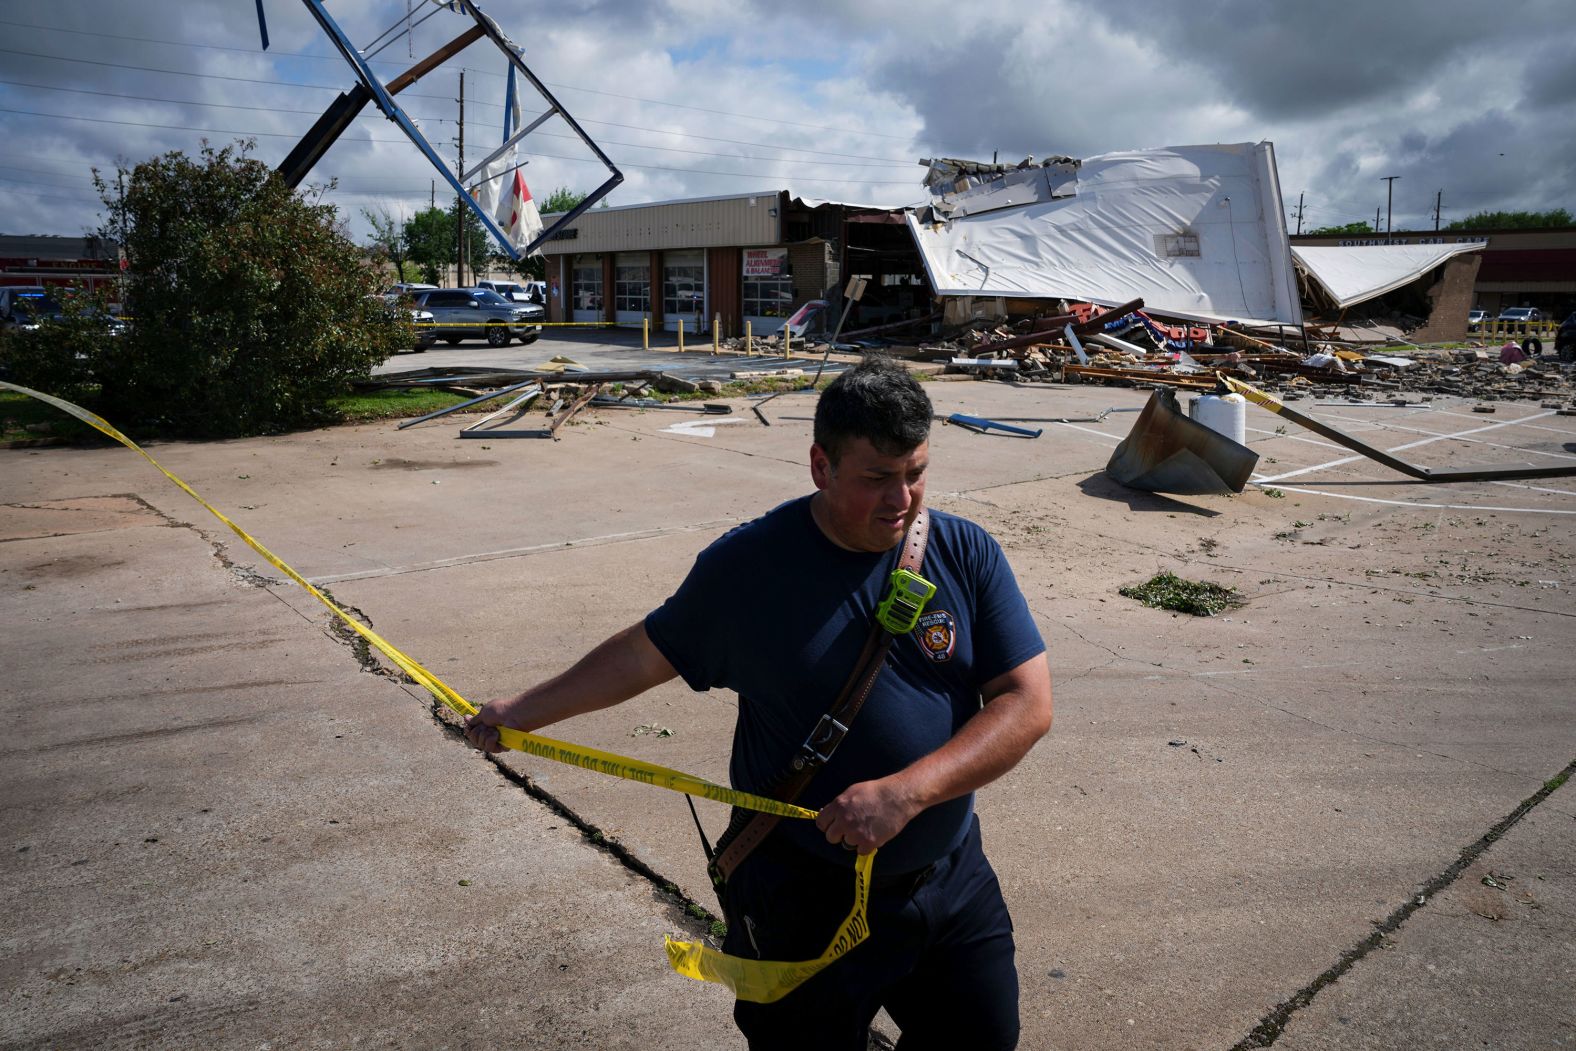 Firefighter Jeremy Perez works the scene where a tornado damaged several businesses in Katy, Texas, on Wednesday, April 10. Dangerous storms moved through parts of the southeast this week, <a href="index.php?page=&url=https%3A%2F%2Fwww.cnn.com%2Fus%2Flive-news%2Fsevere-storms-texas-south-04-10-24%2Findex.html" target="_blank">spawning tornadoes and flash flood emergencies</a>.